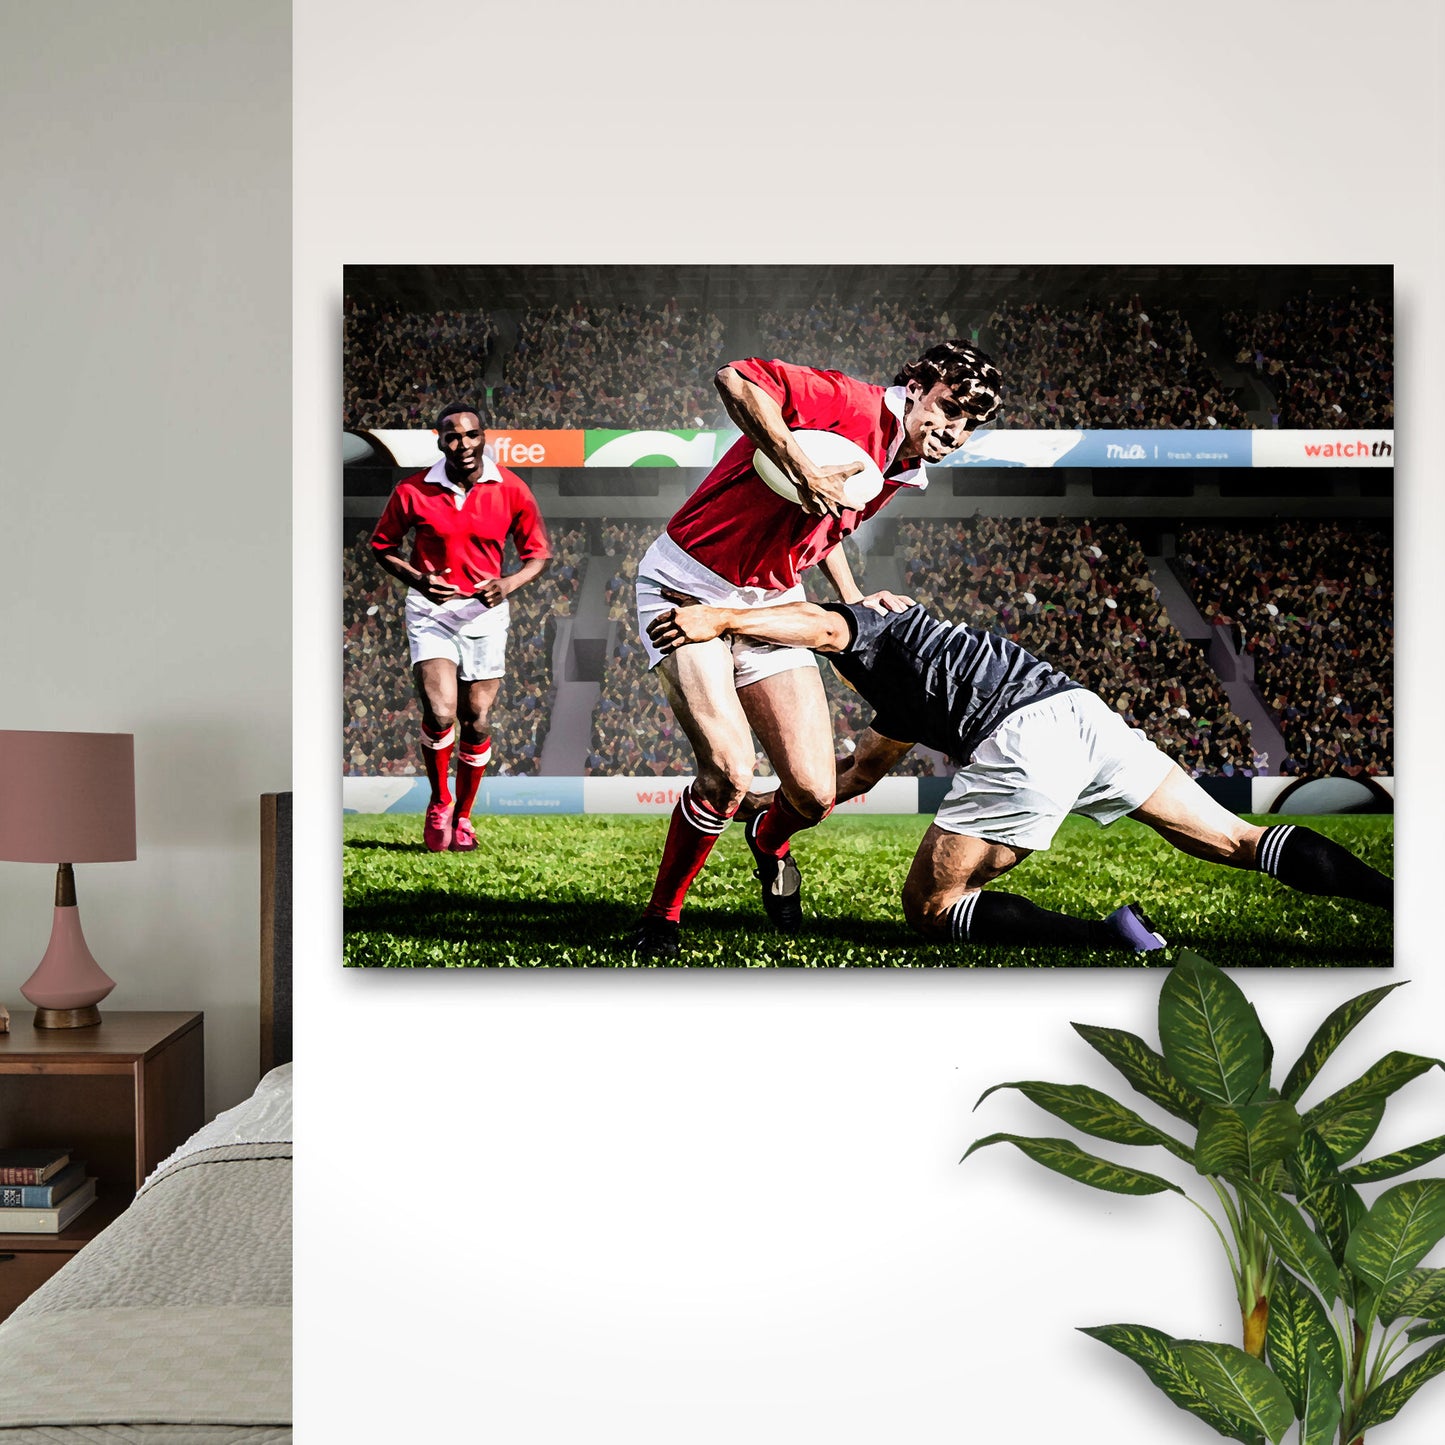 Rugby Match Canvas Wall Art Style 1 - Image by Tailored Canvases